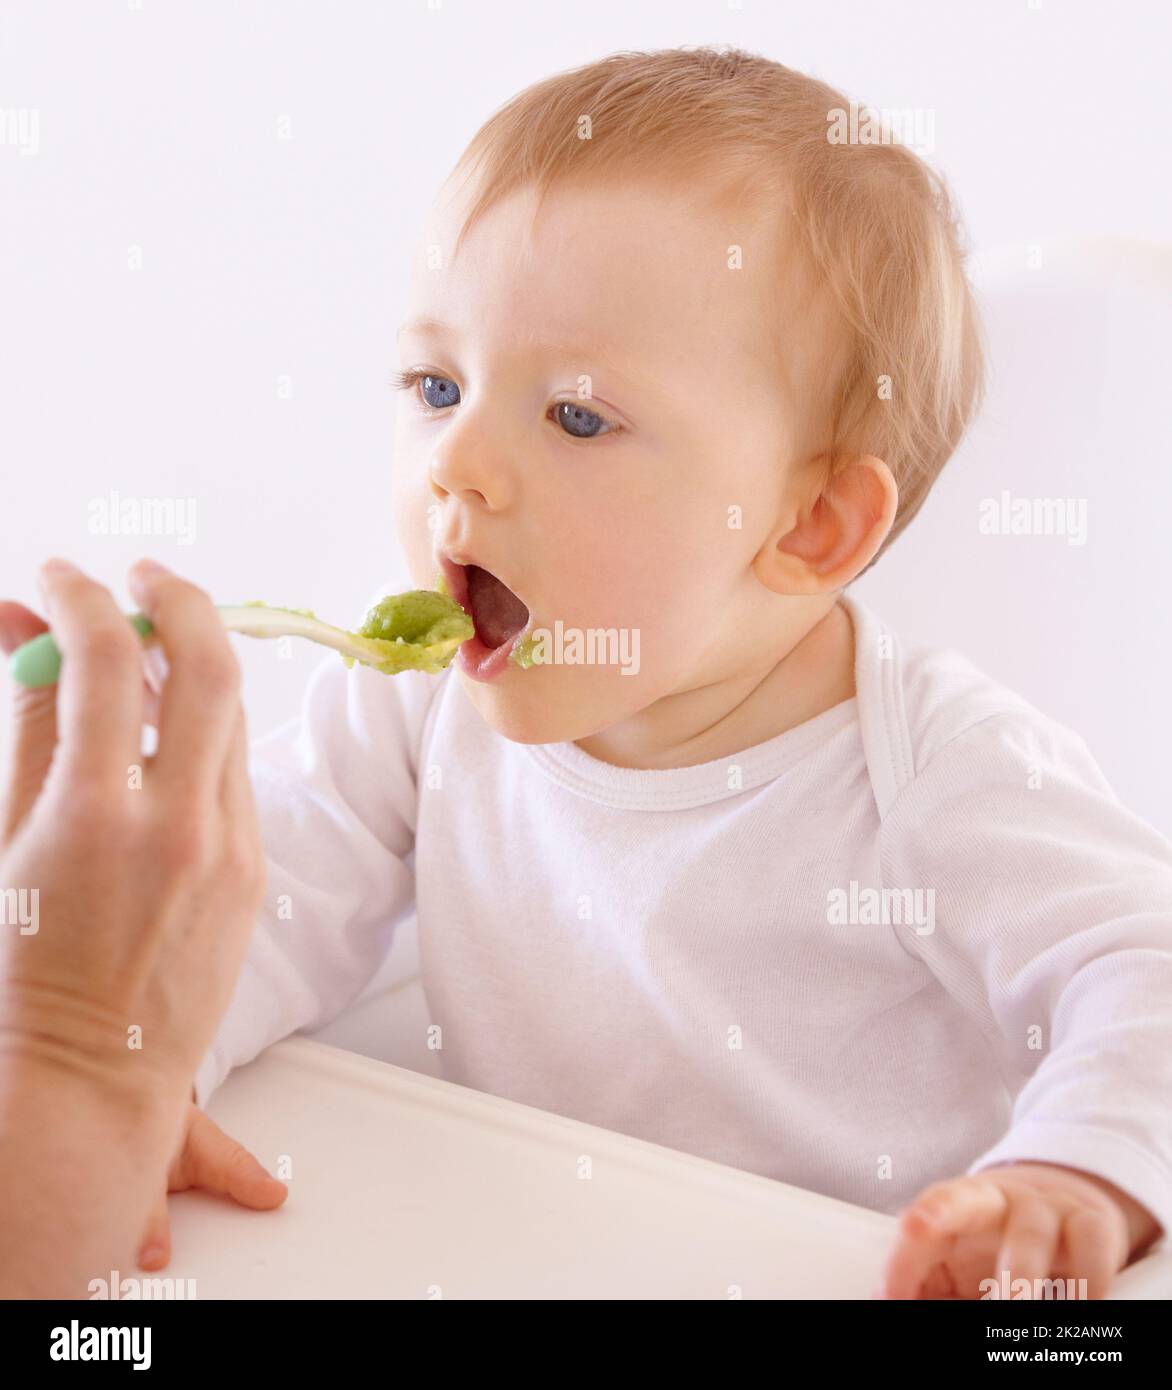 Hes got a good appetite. A cute baby accepting a spoonful of food by his mom. Stock Photo